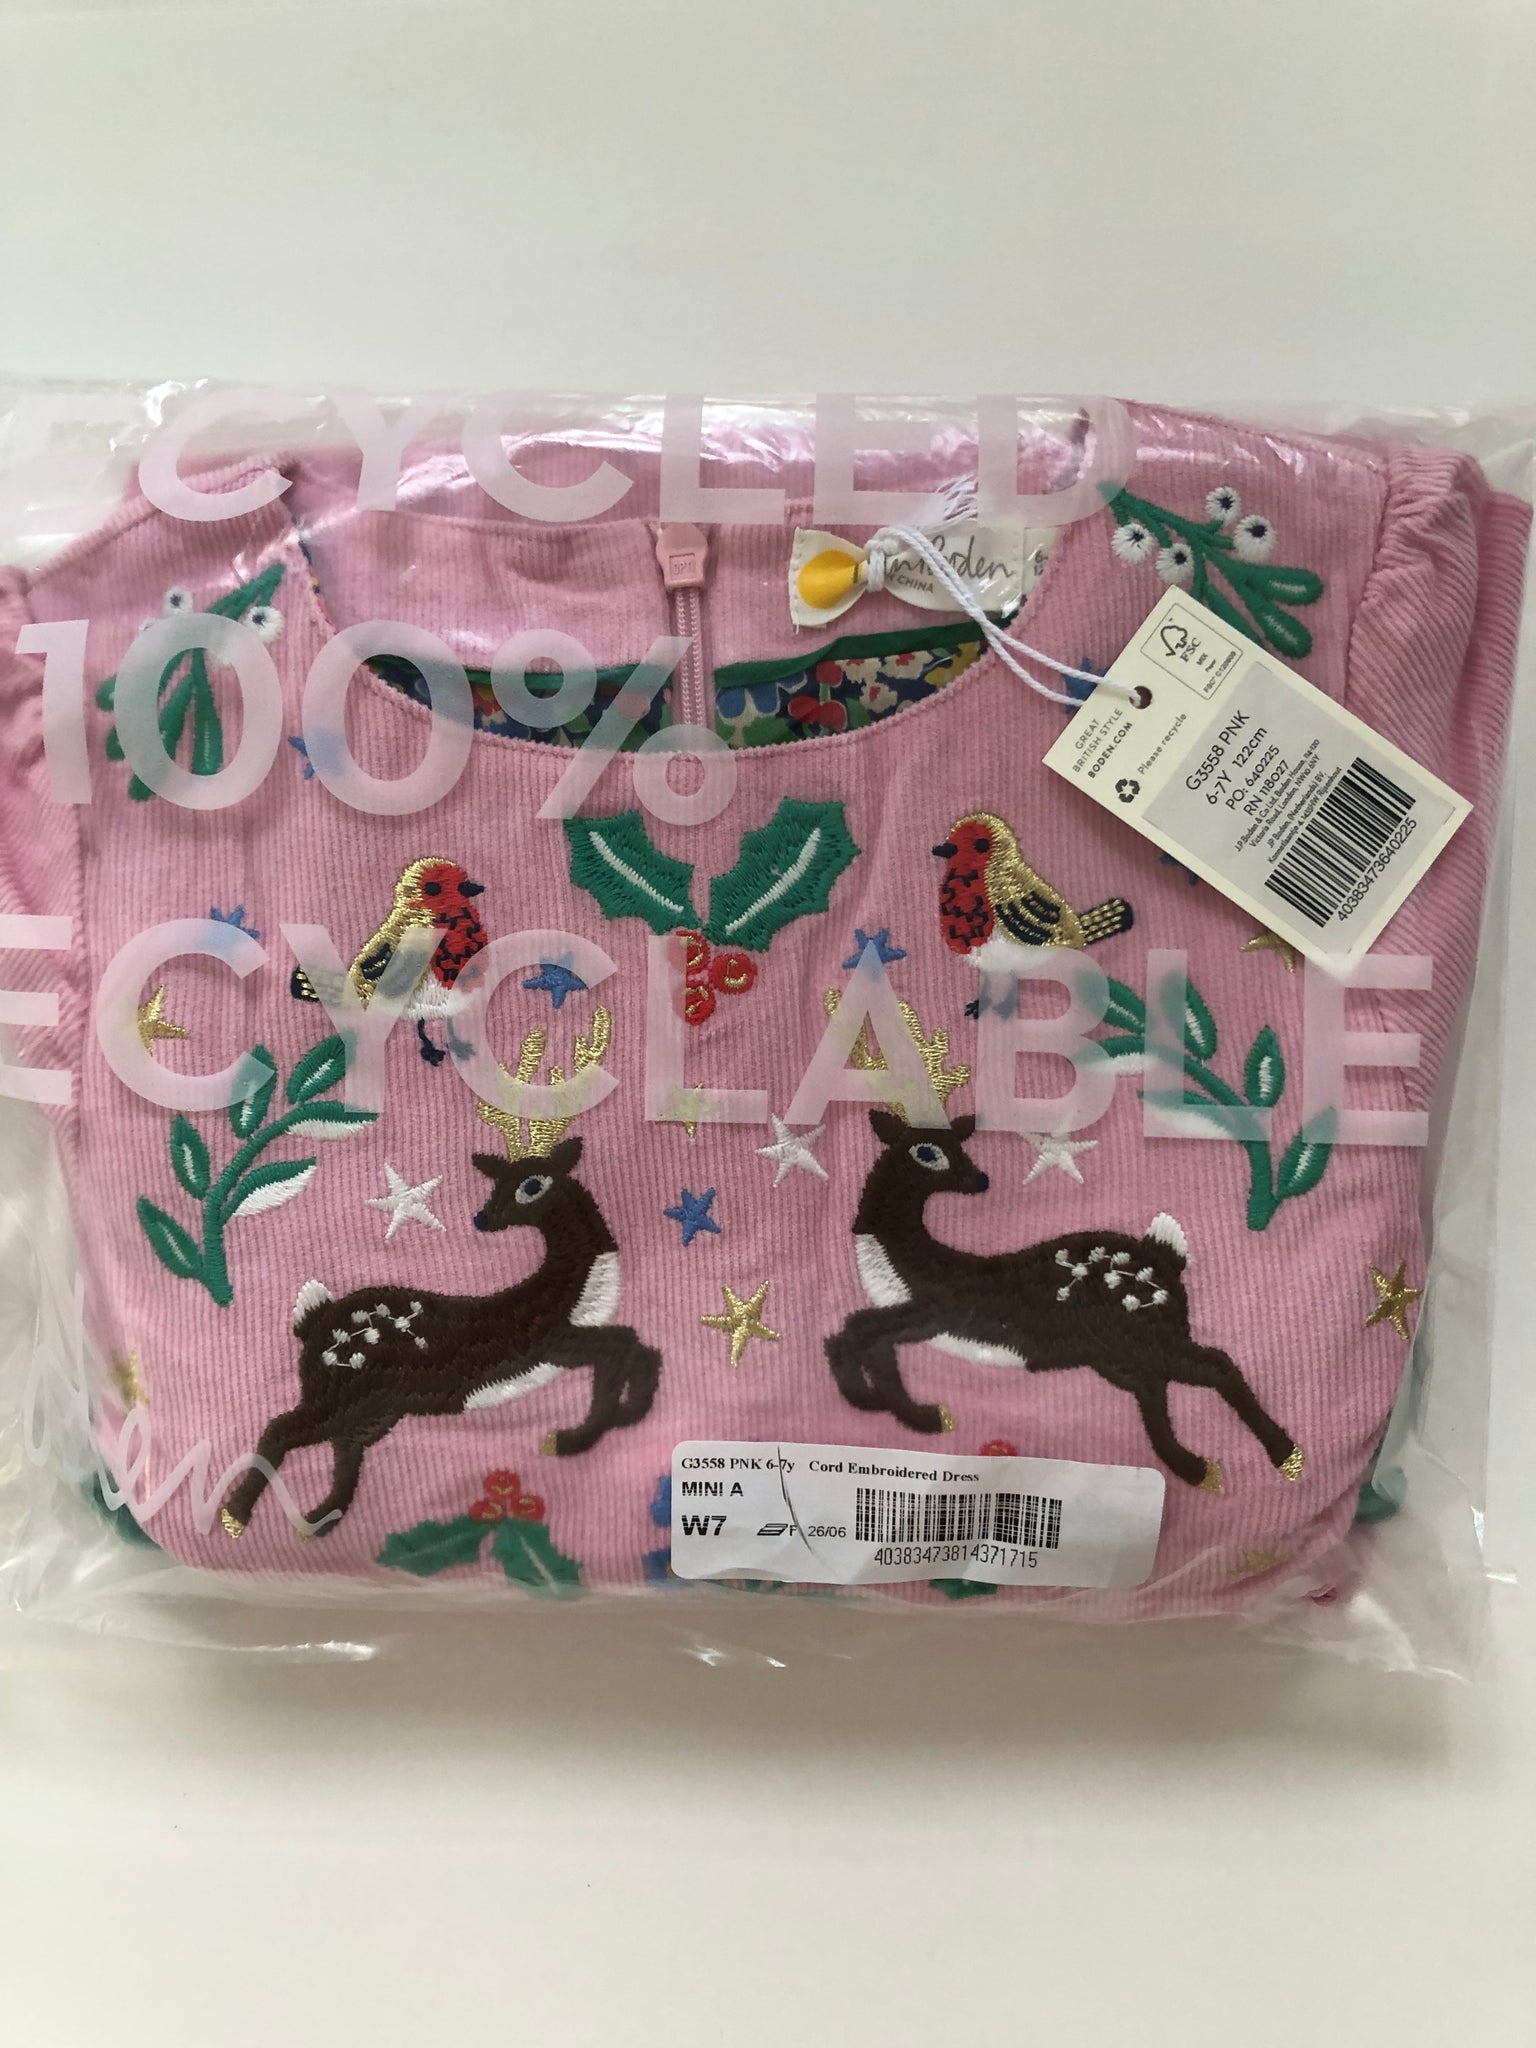 NWT Mini Boden Pink Reindeer Cord Embroidered Party Dress